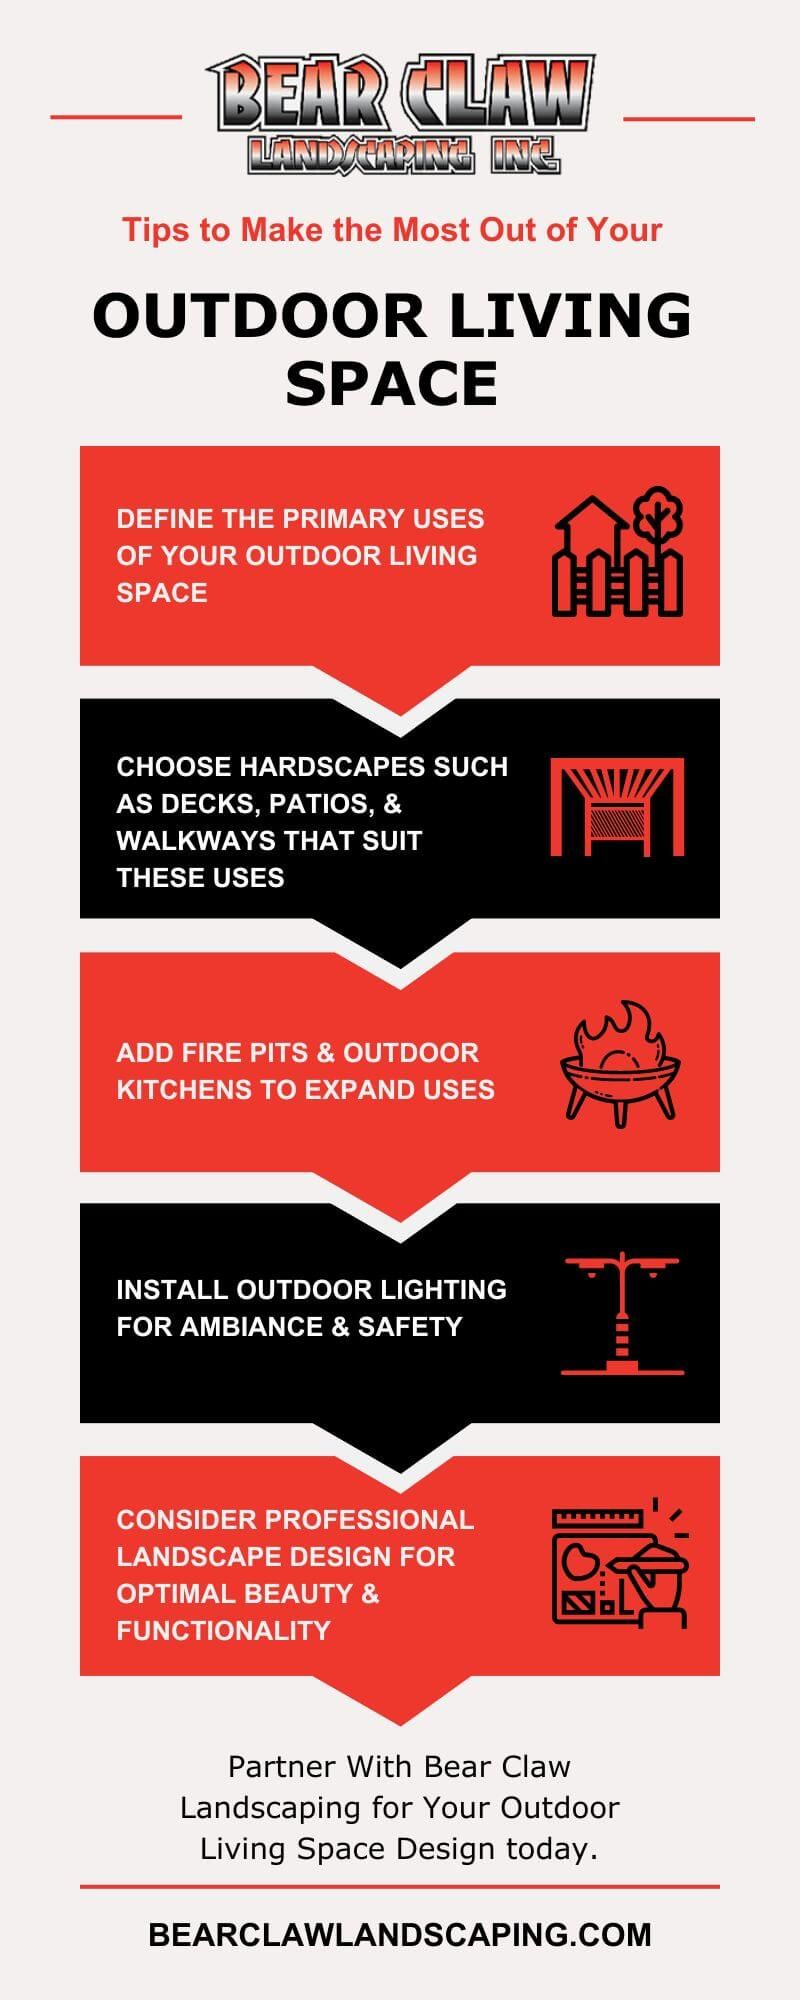 Tips to Make the Most Out of Your Outdoor Living Space infographic